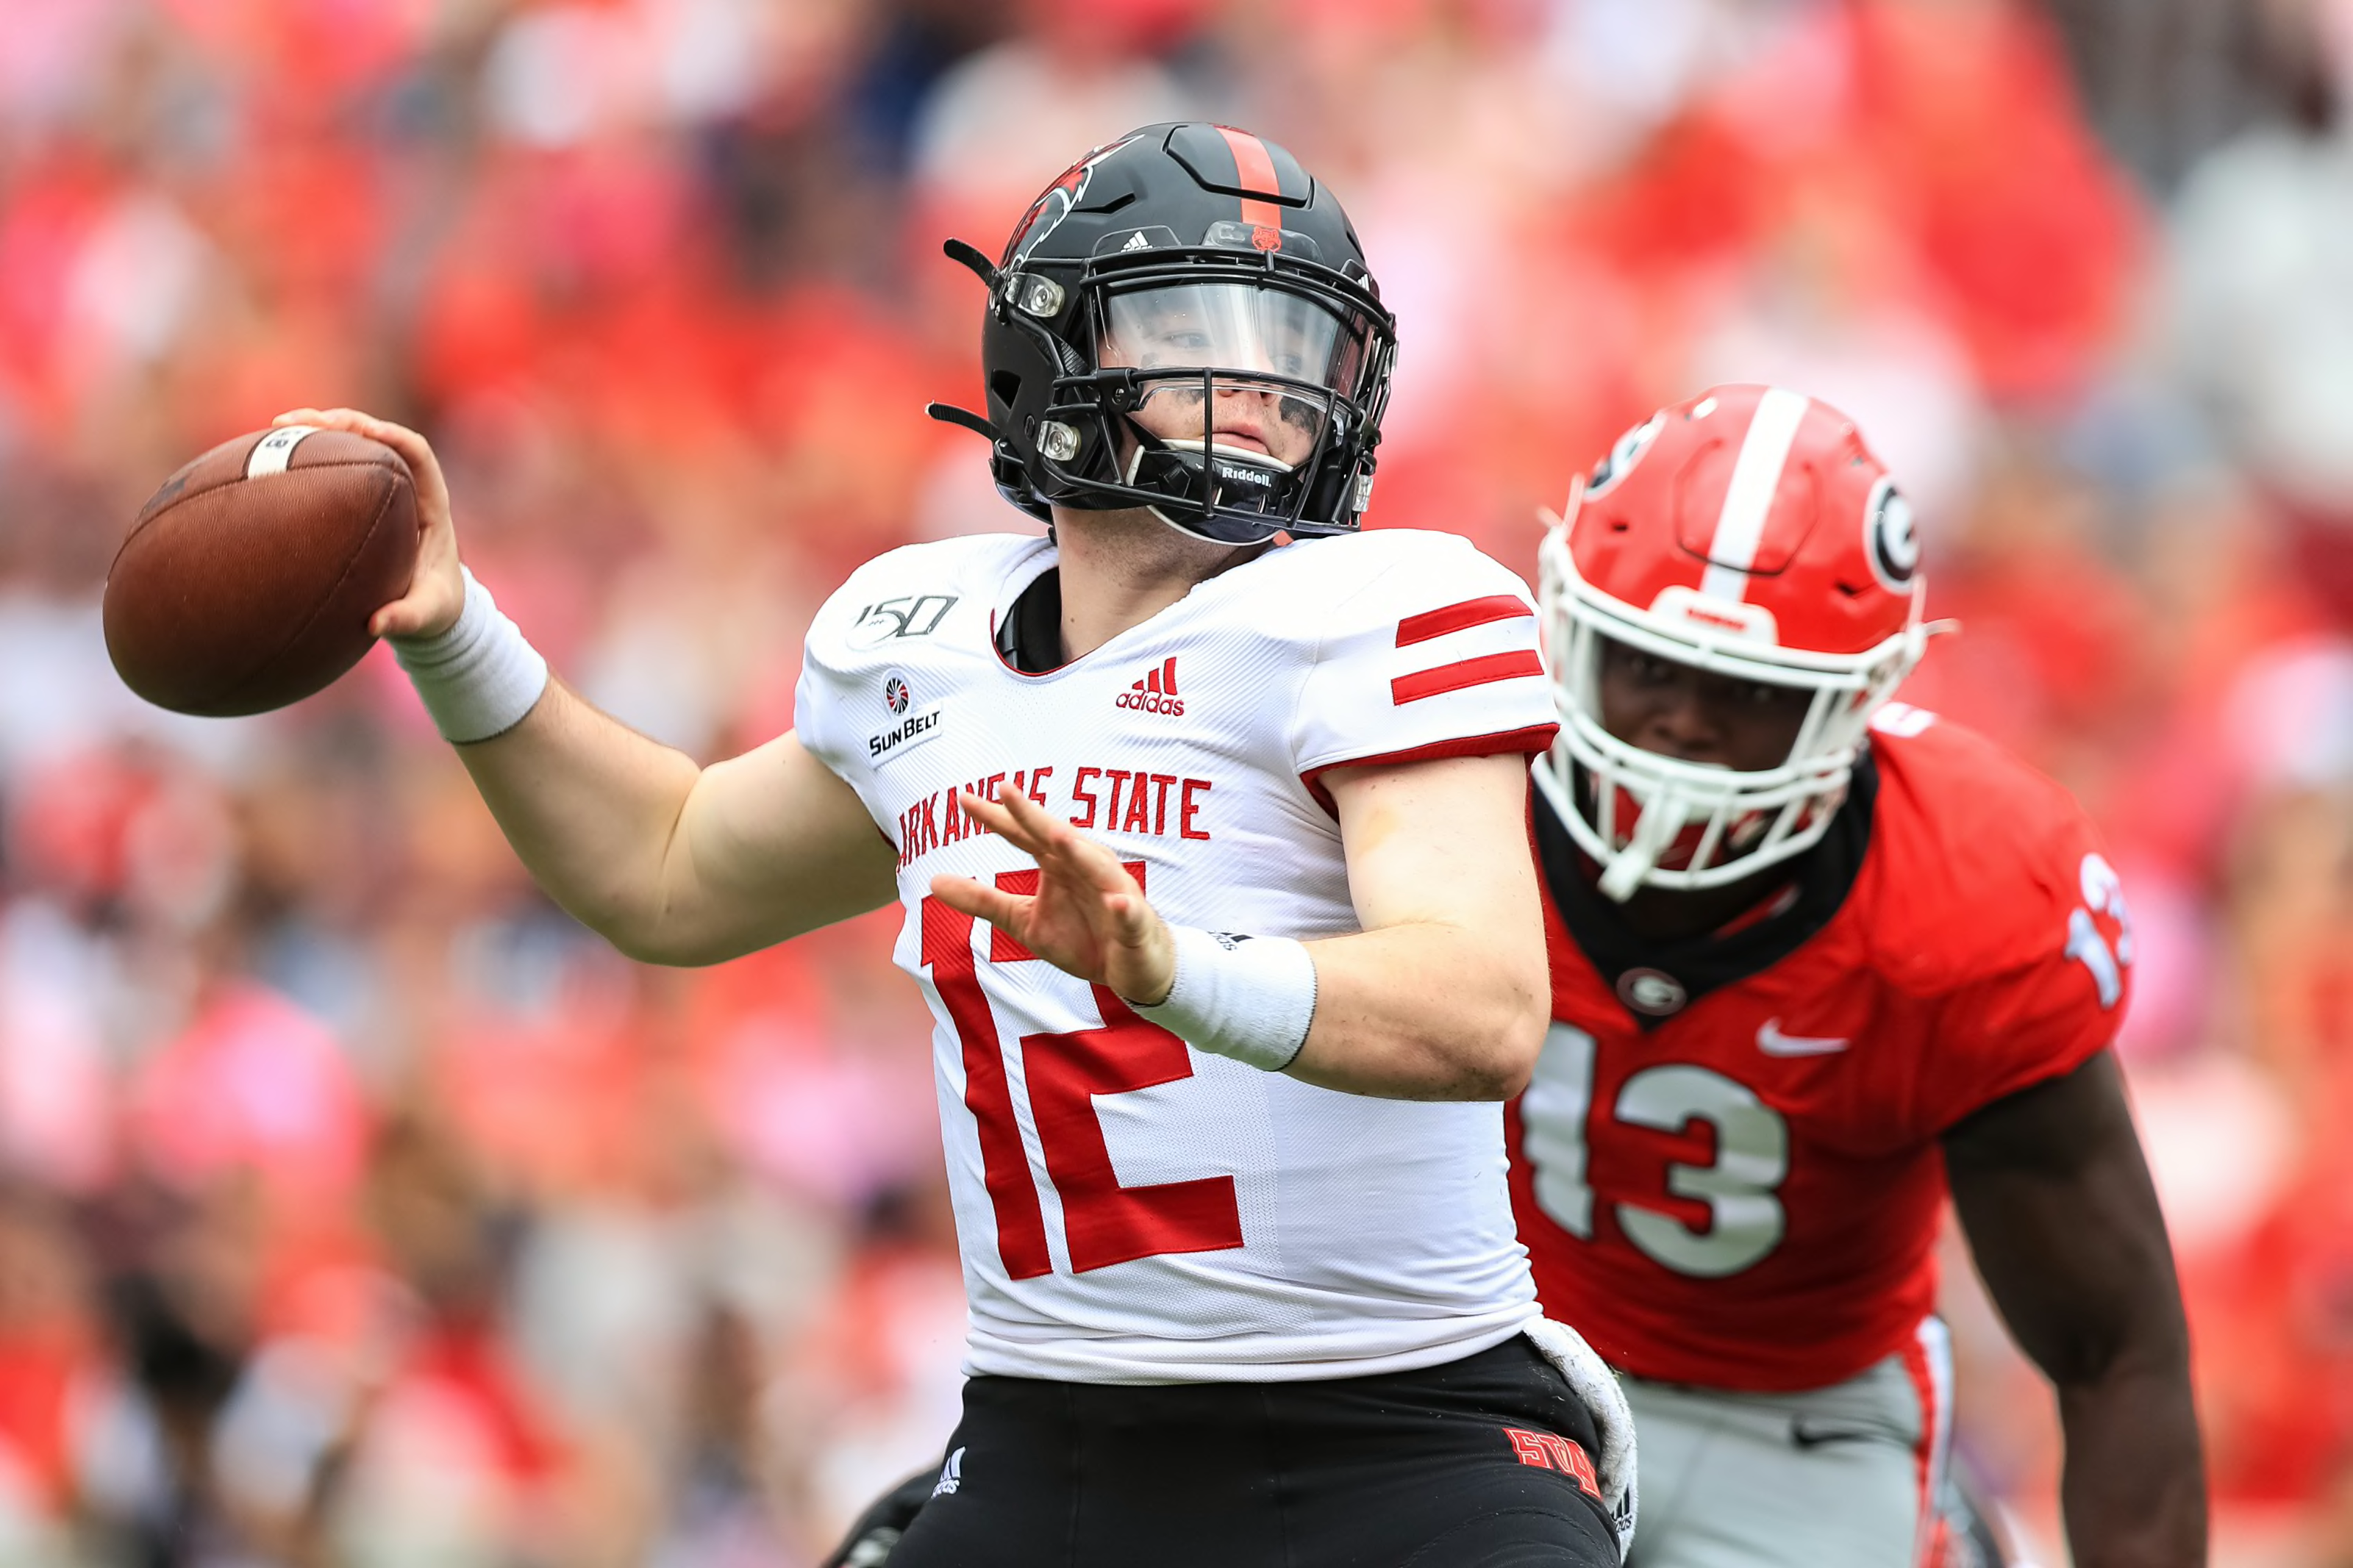 Arkansas State football has real shot at Sun Belt title in 2020 Page 2